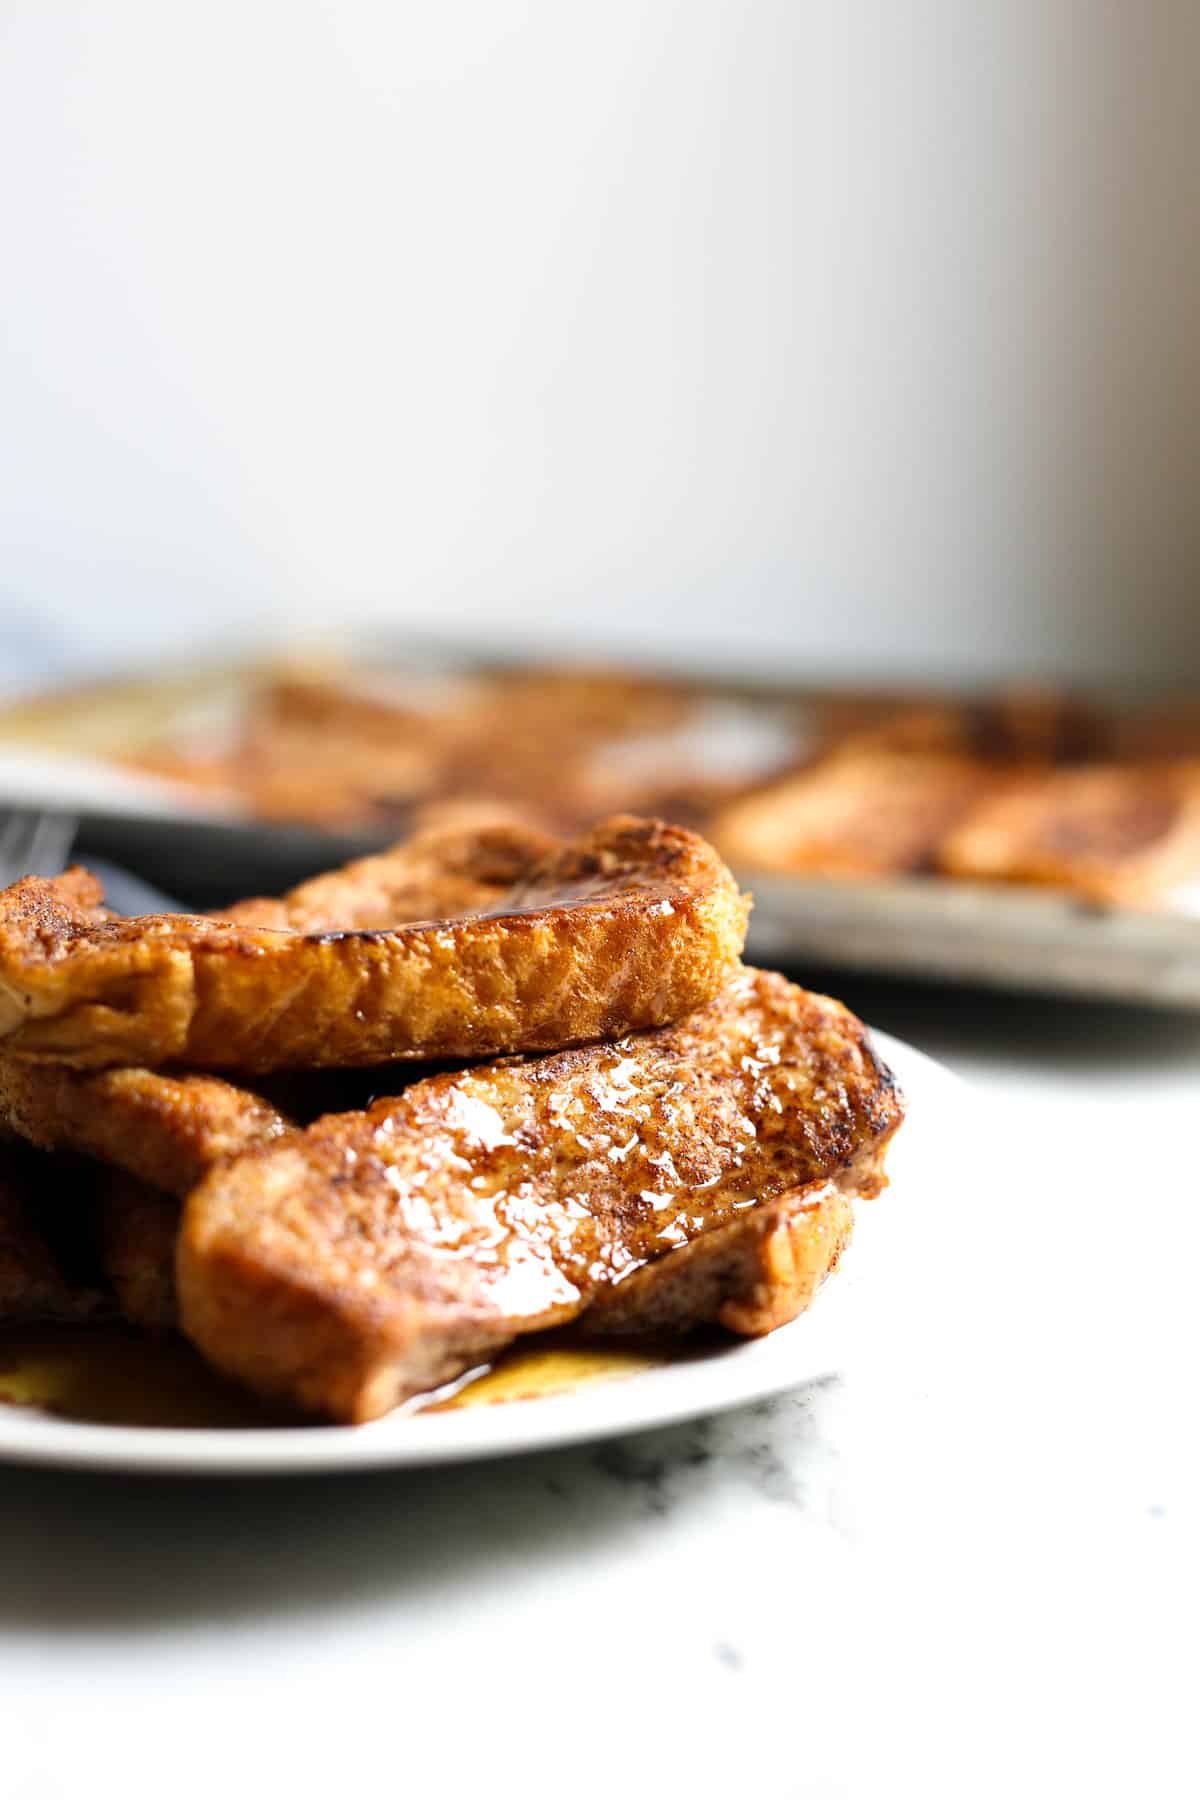 These homemade VEGAN French Toast Sticks are super quick, easy and healthy to make! Cinnamon flavored and totally yummy! no bananas or weird ingredients!